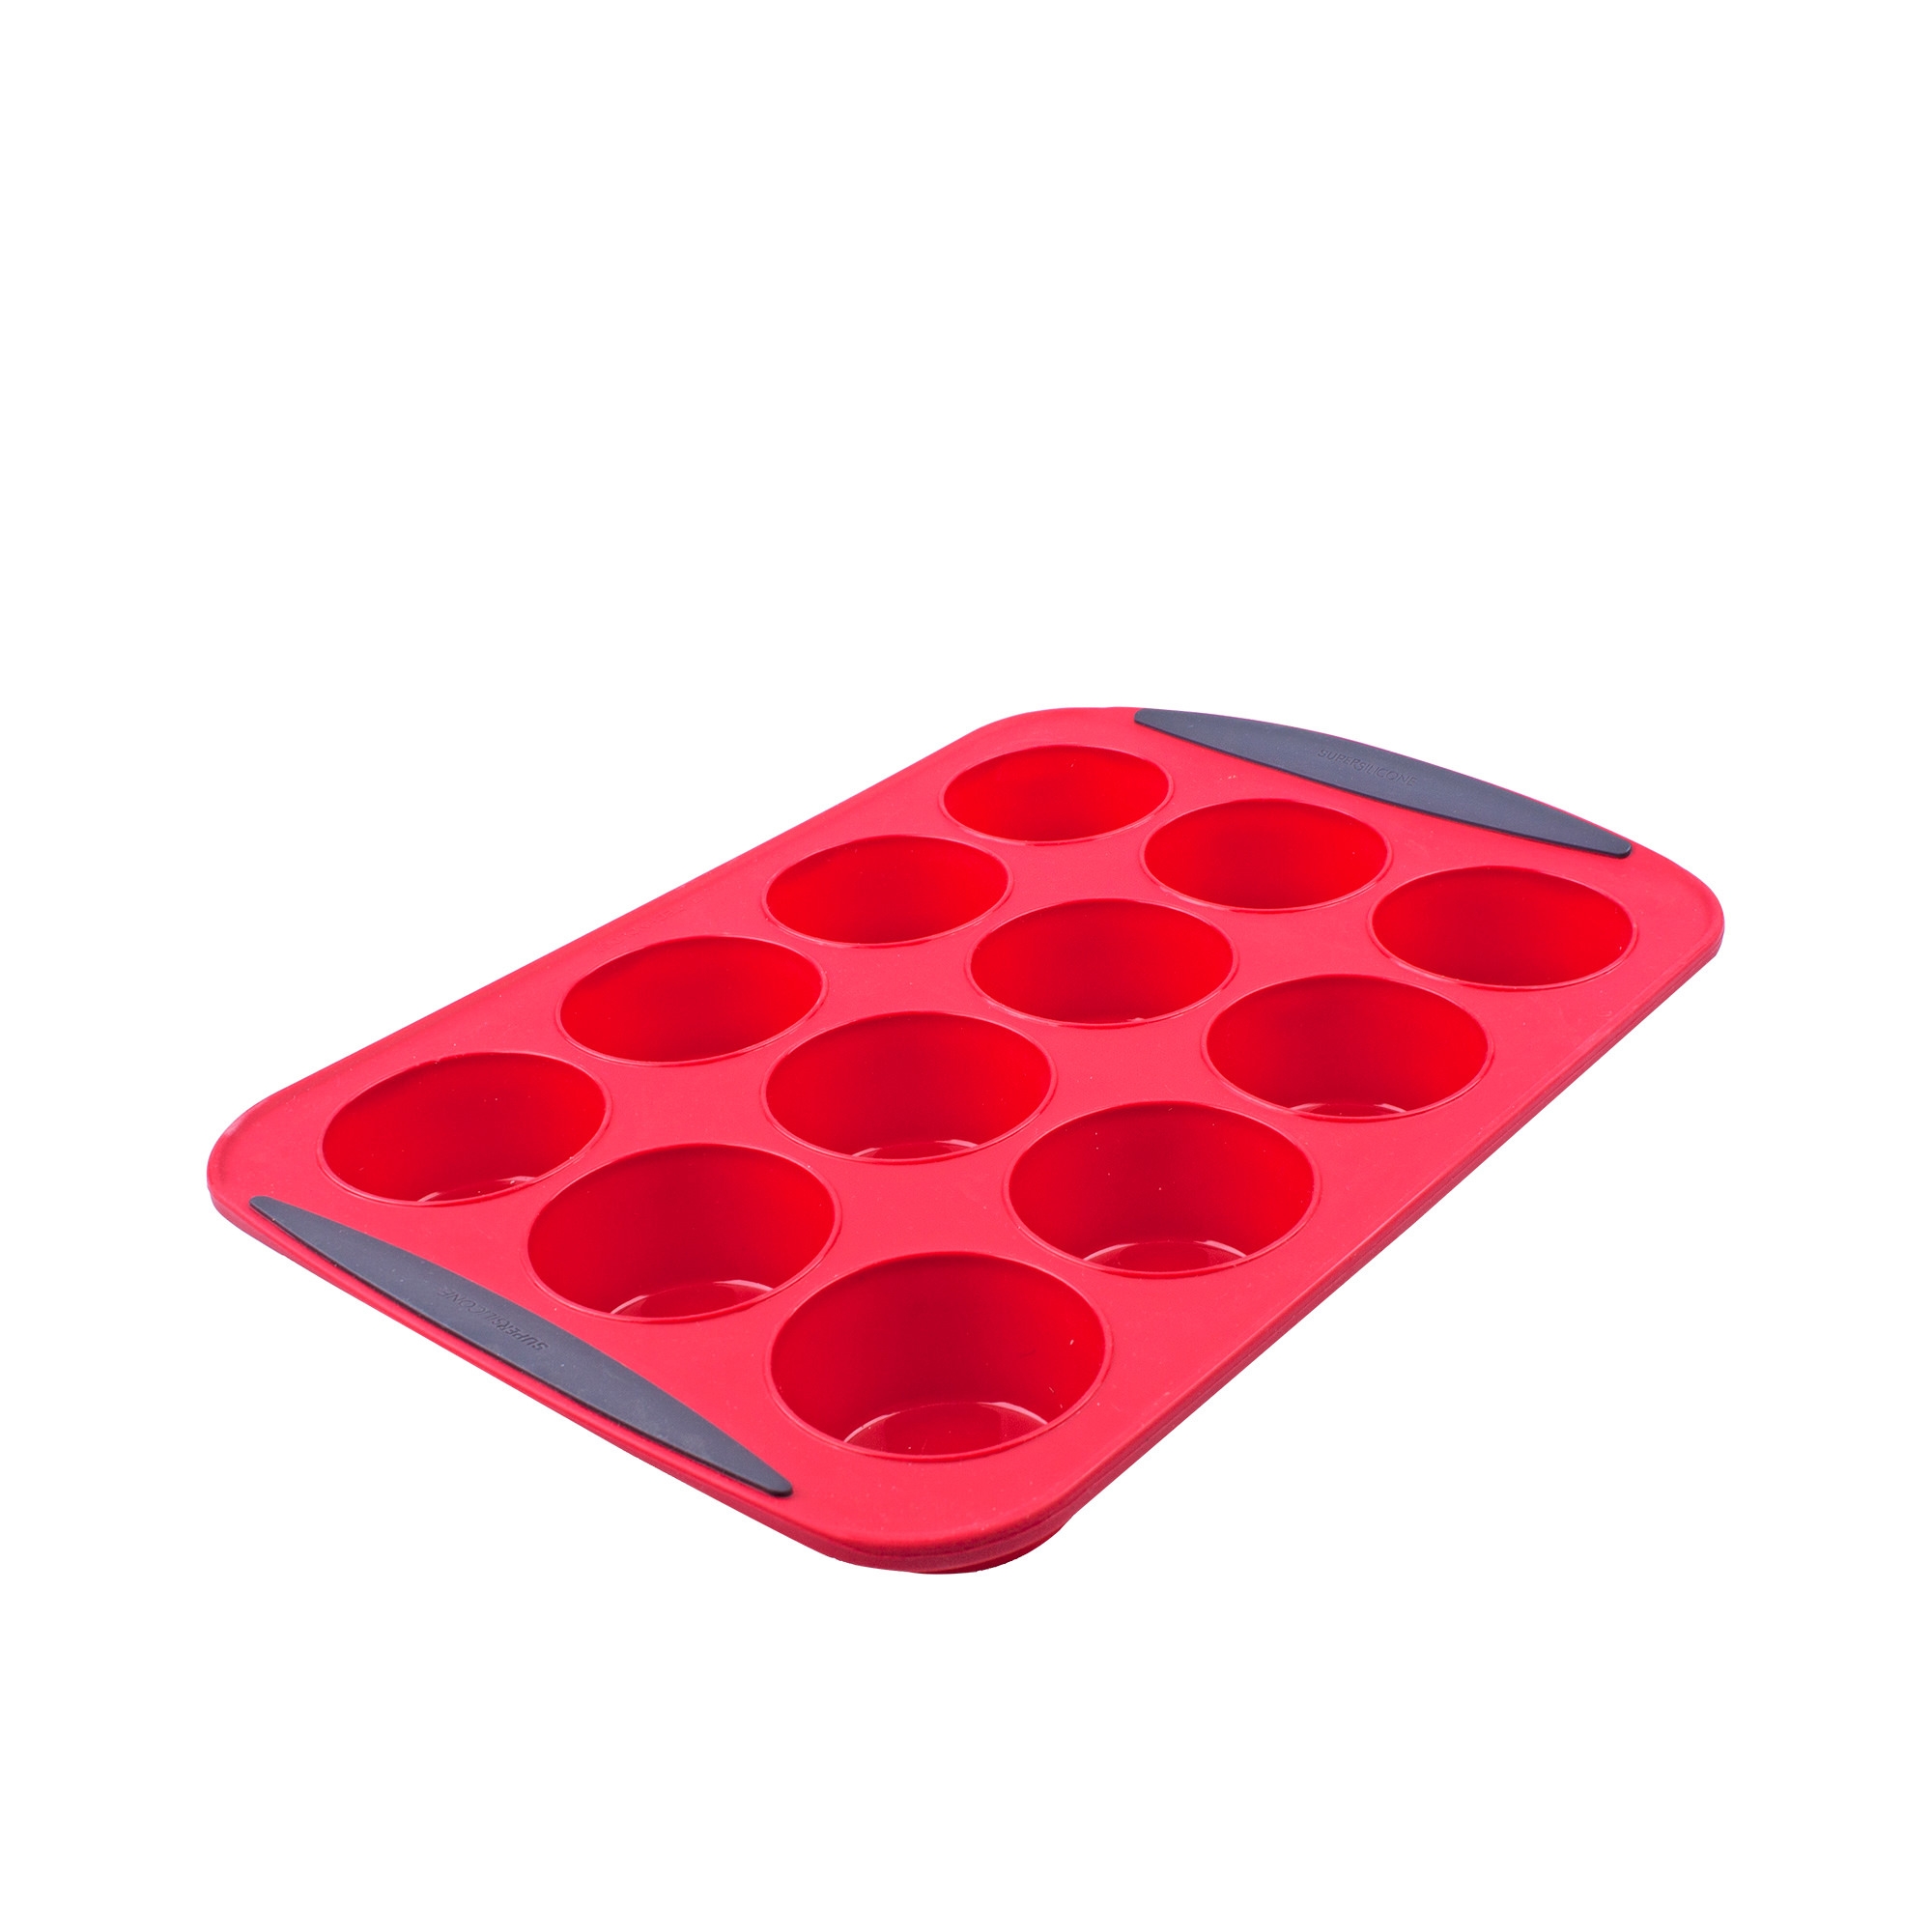 Daily Bake Silicone Muffin Pan 12 Cup Red Image 1